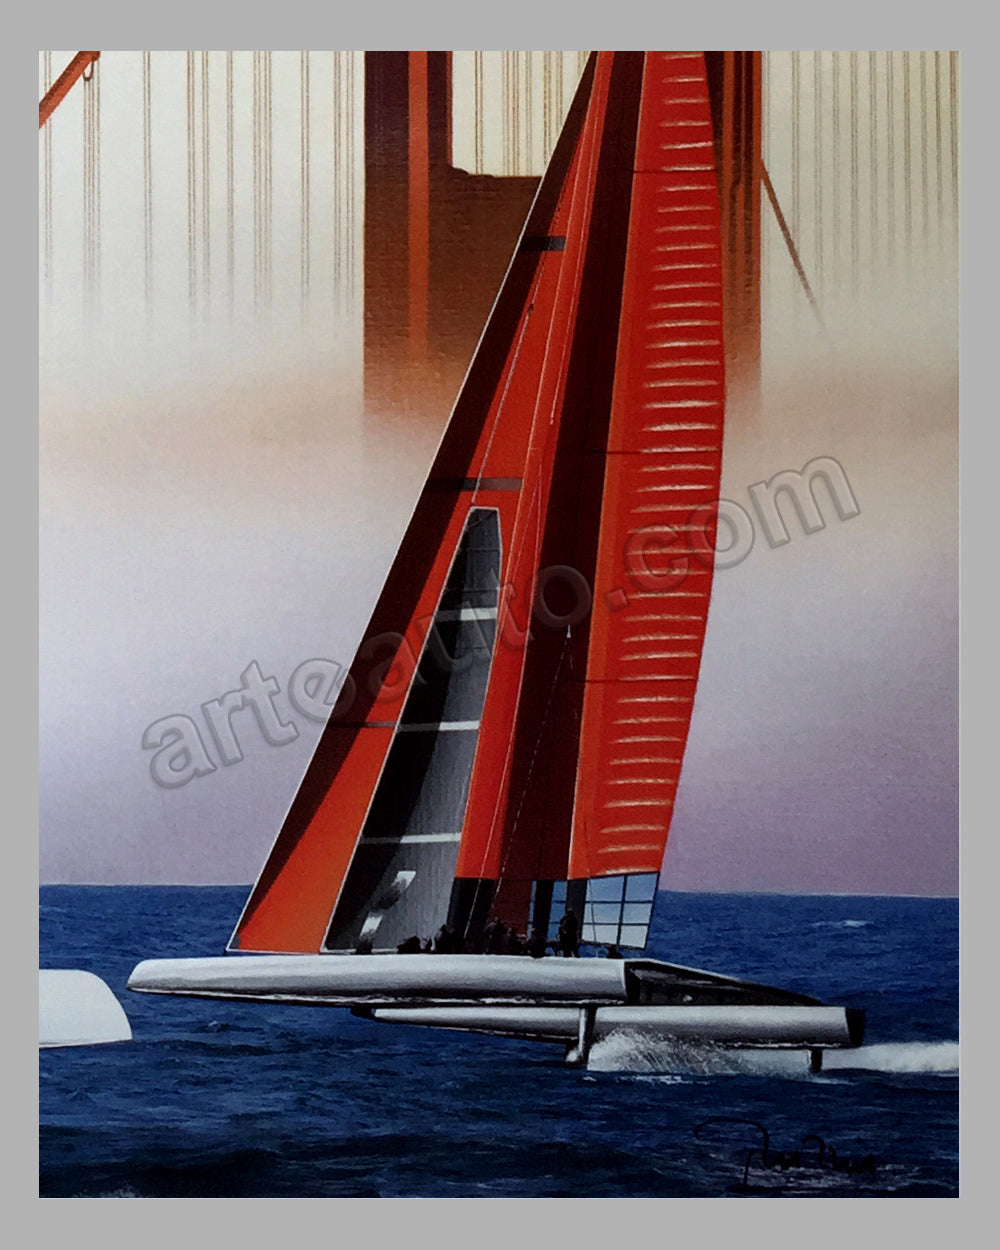 Louis Vuitton Cup, San Francisco, 2013 poster by Razzia Temporarily Out of  Stock$425.00